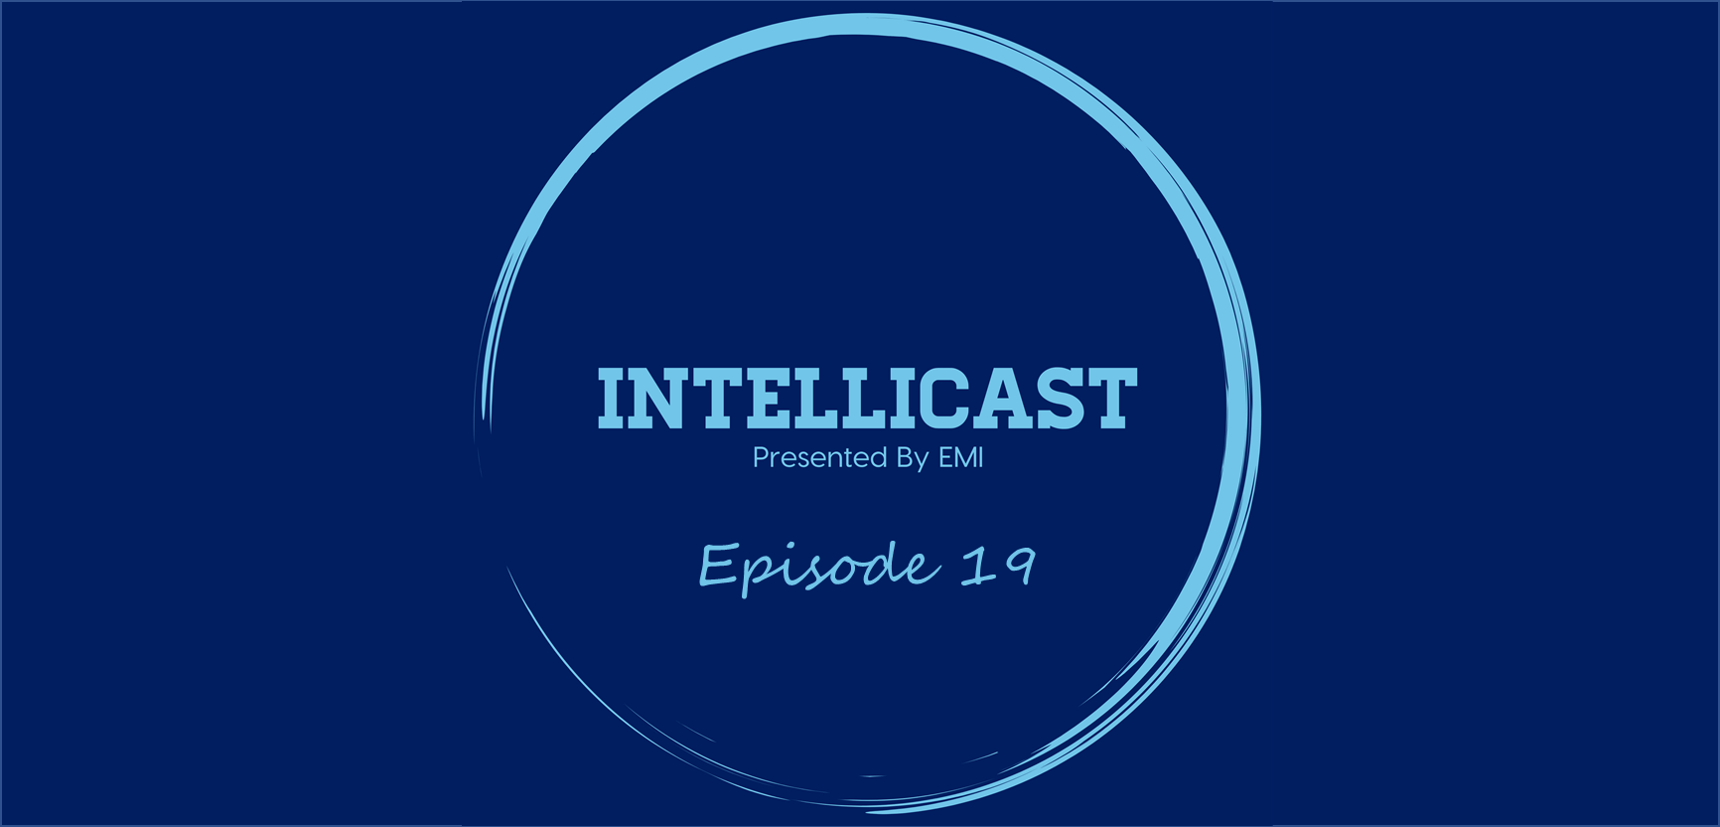 Intellicast Episode 19 - Jerry Haselmayer of The Living Room